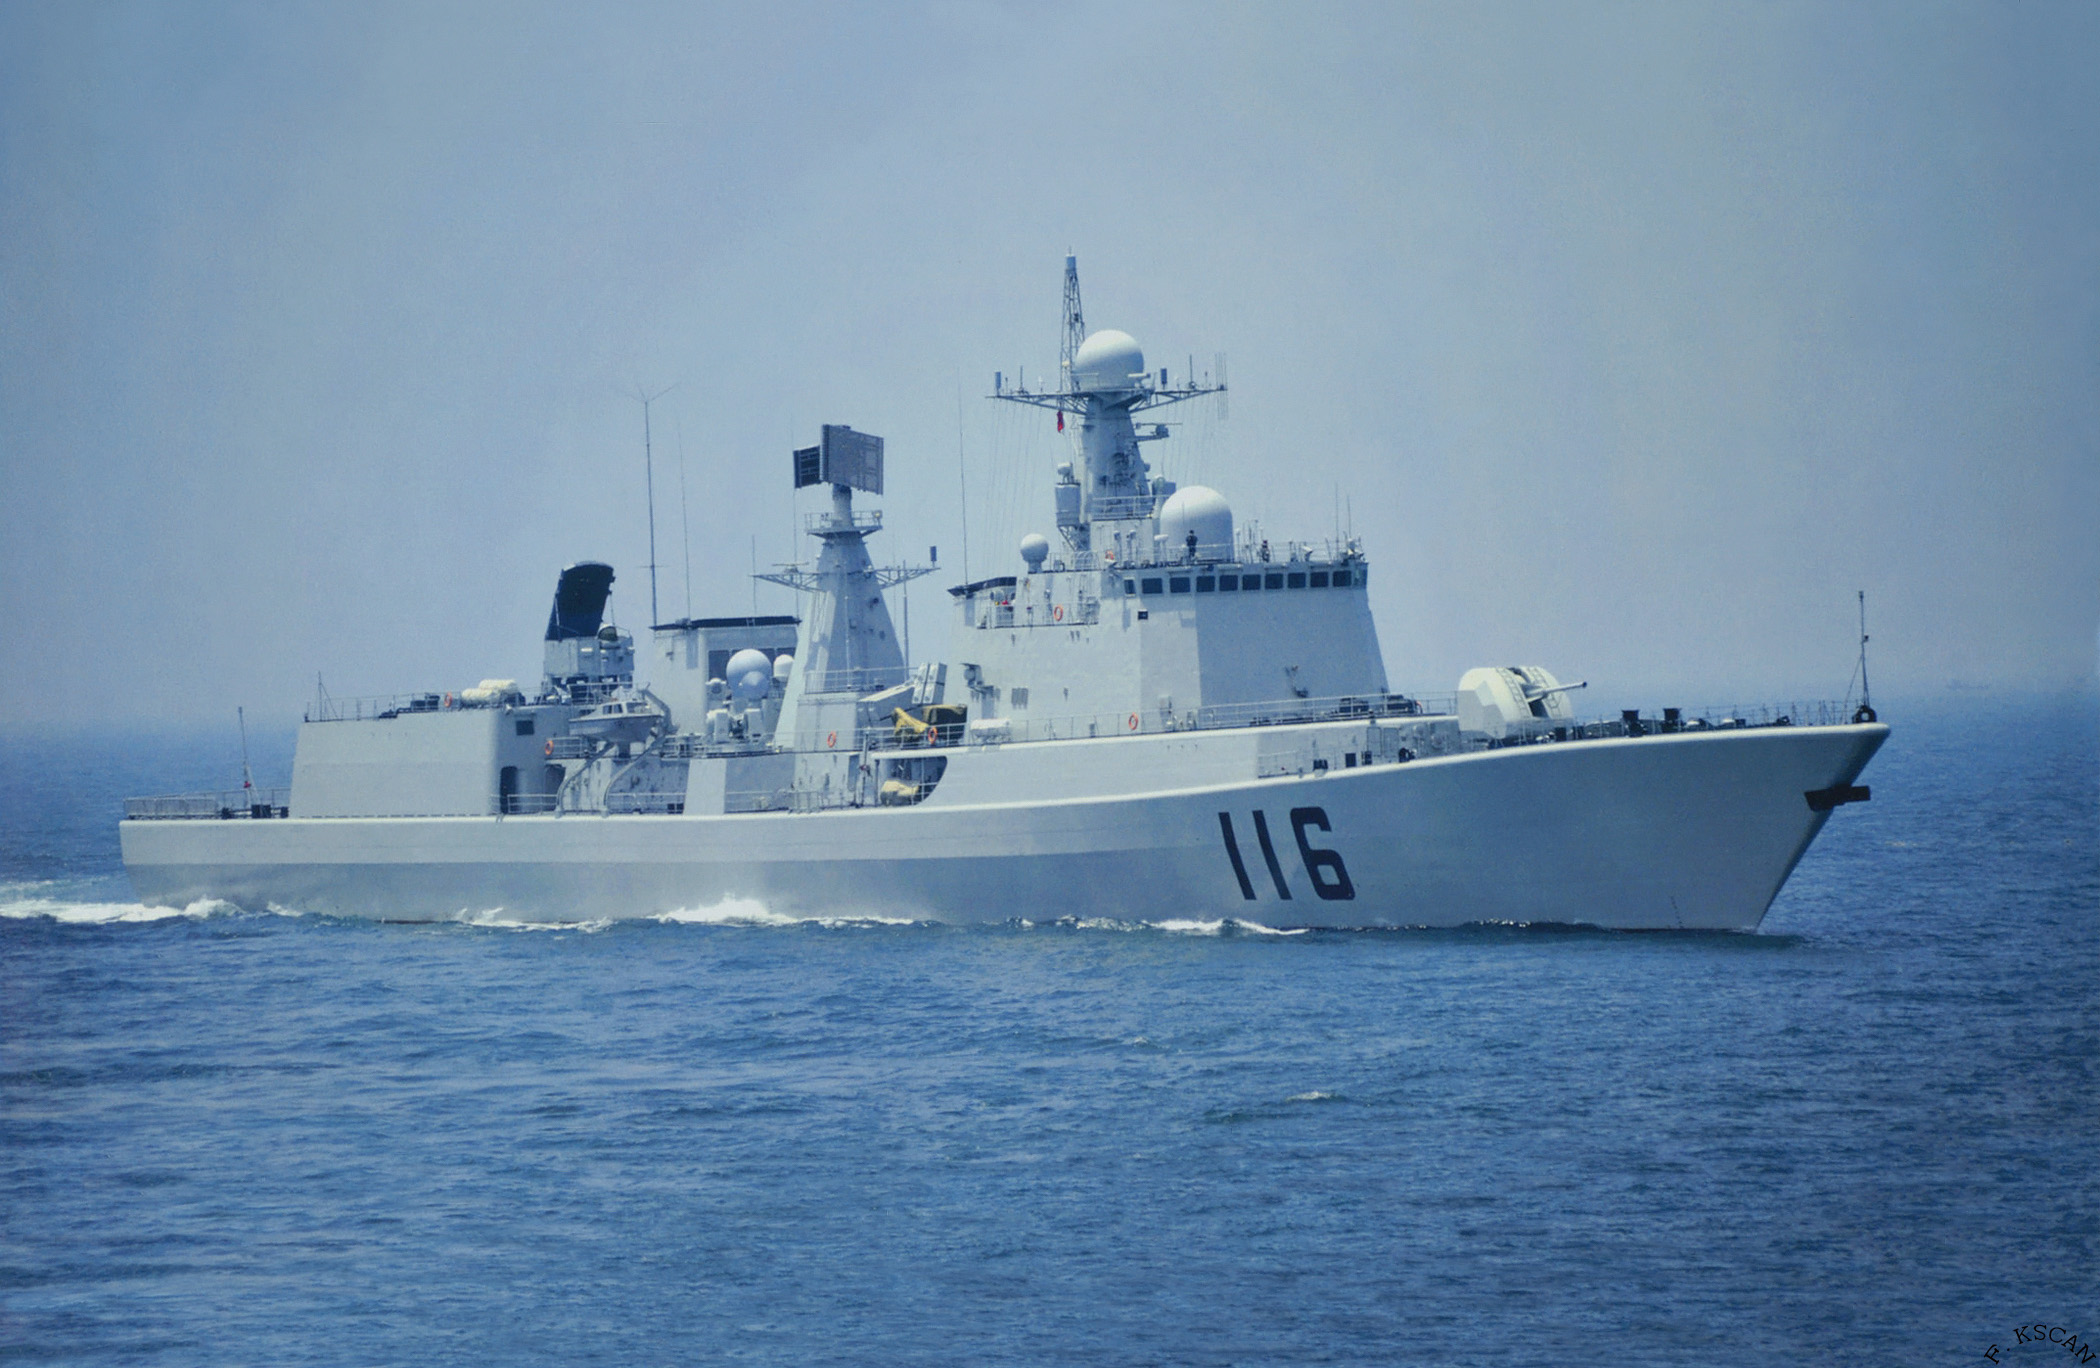 Type 055 Destroyer. China Navy. Chinese Missile Boat. Оборона военно морских баз